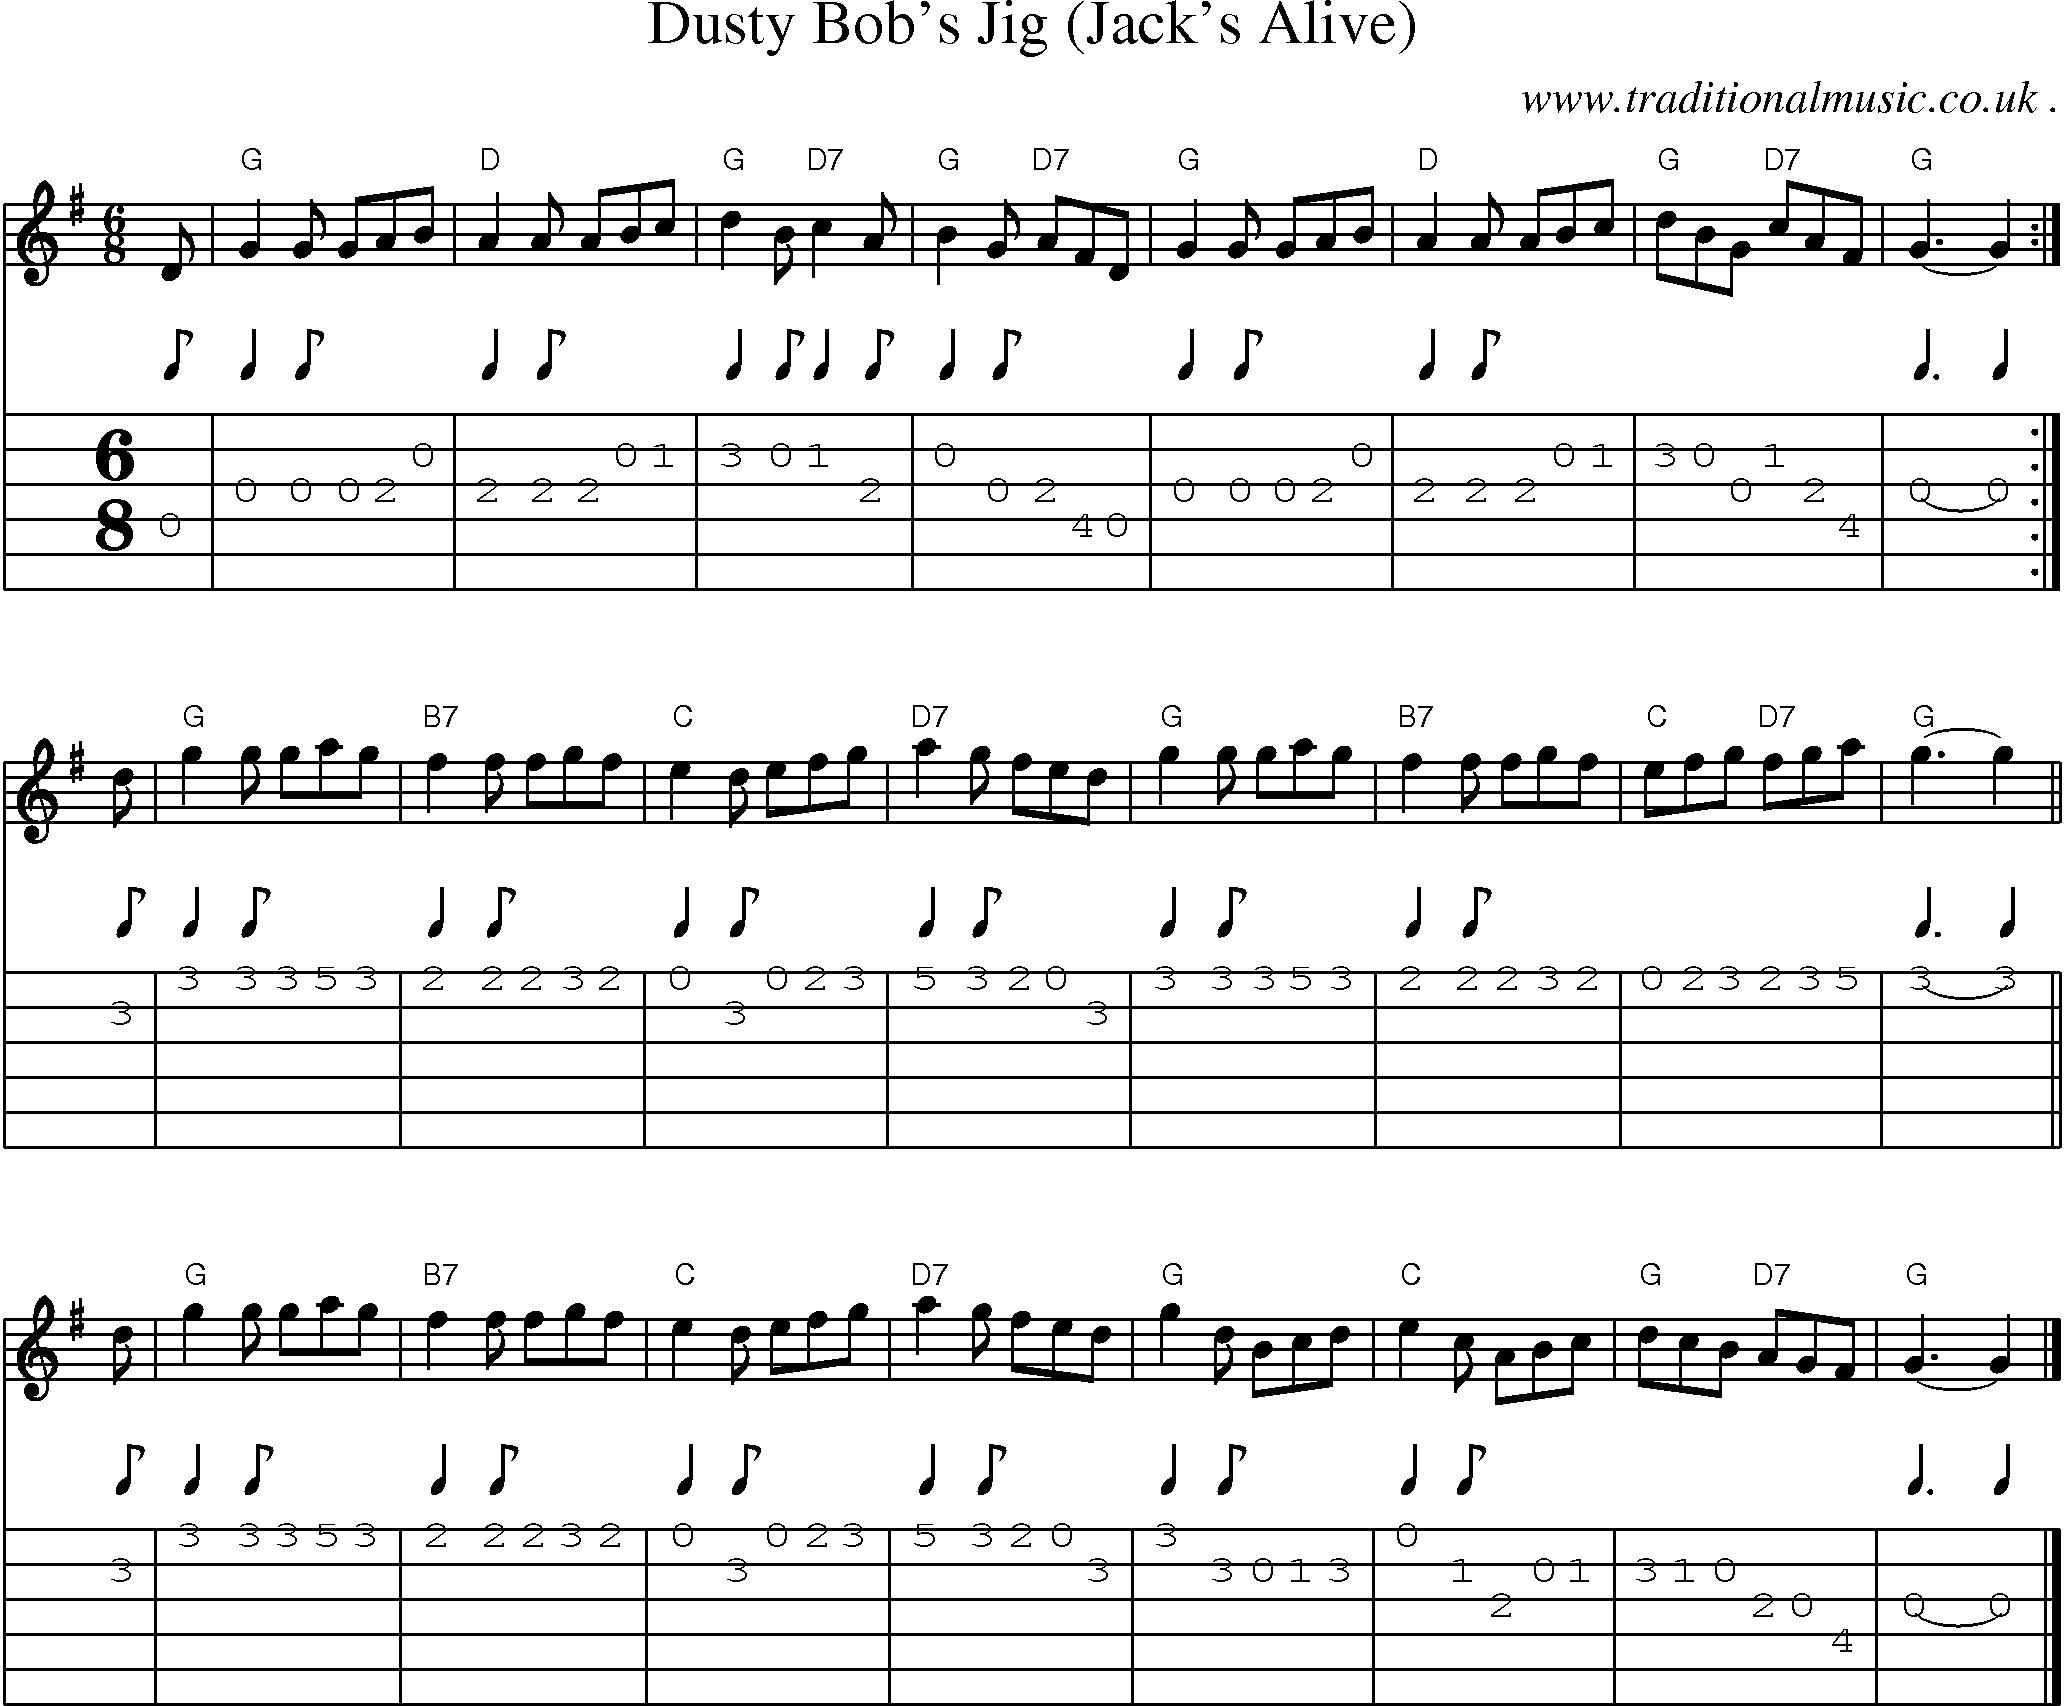 Sheet-music  score, Chords and Guitar Tabs for Dusty Bobs Jig Jacks Alive